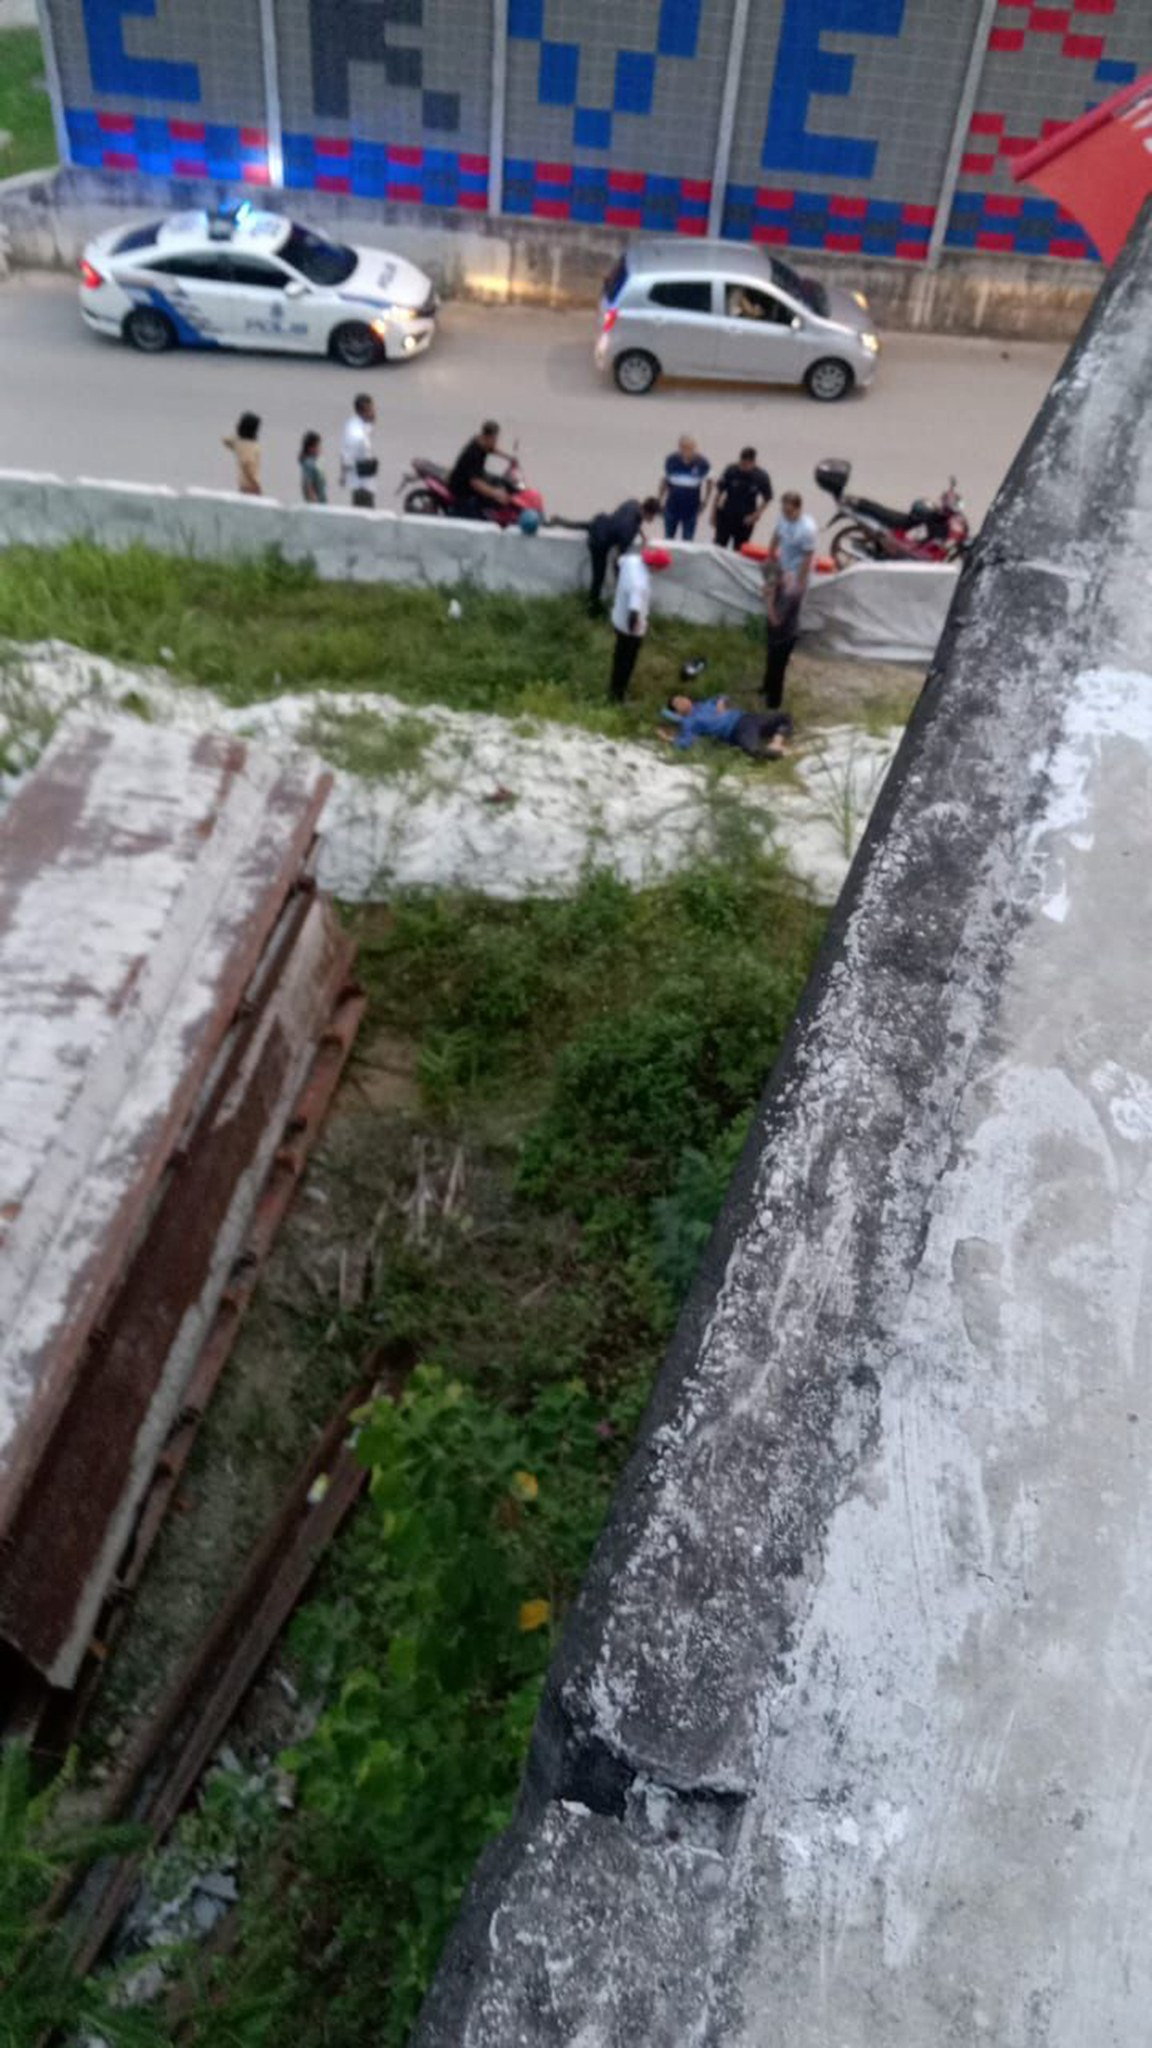 21yo m'sian student falls 20 metres from flyover, left severely injured